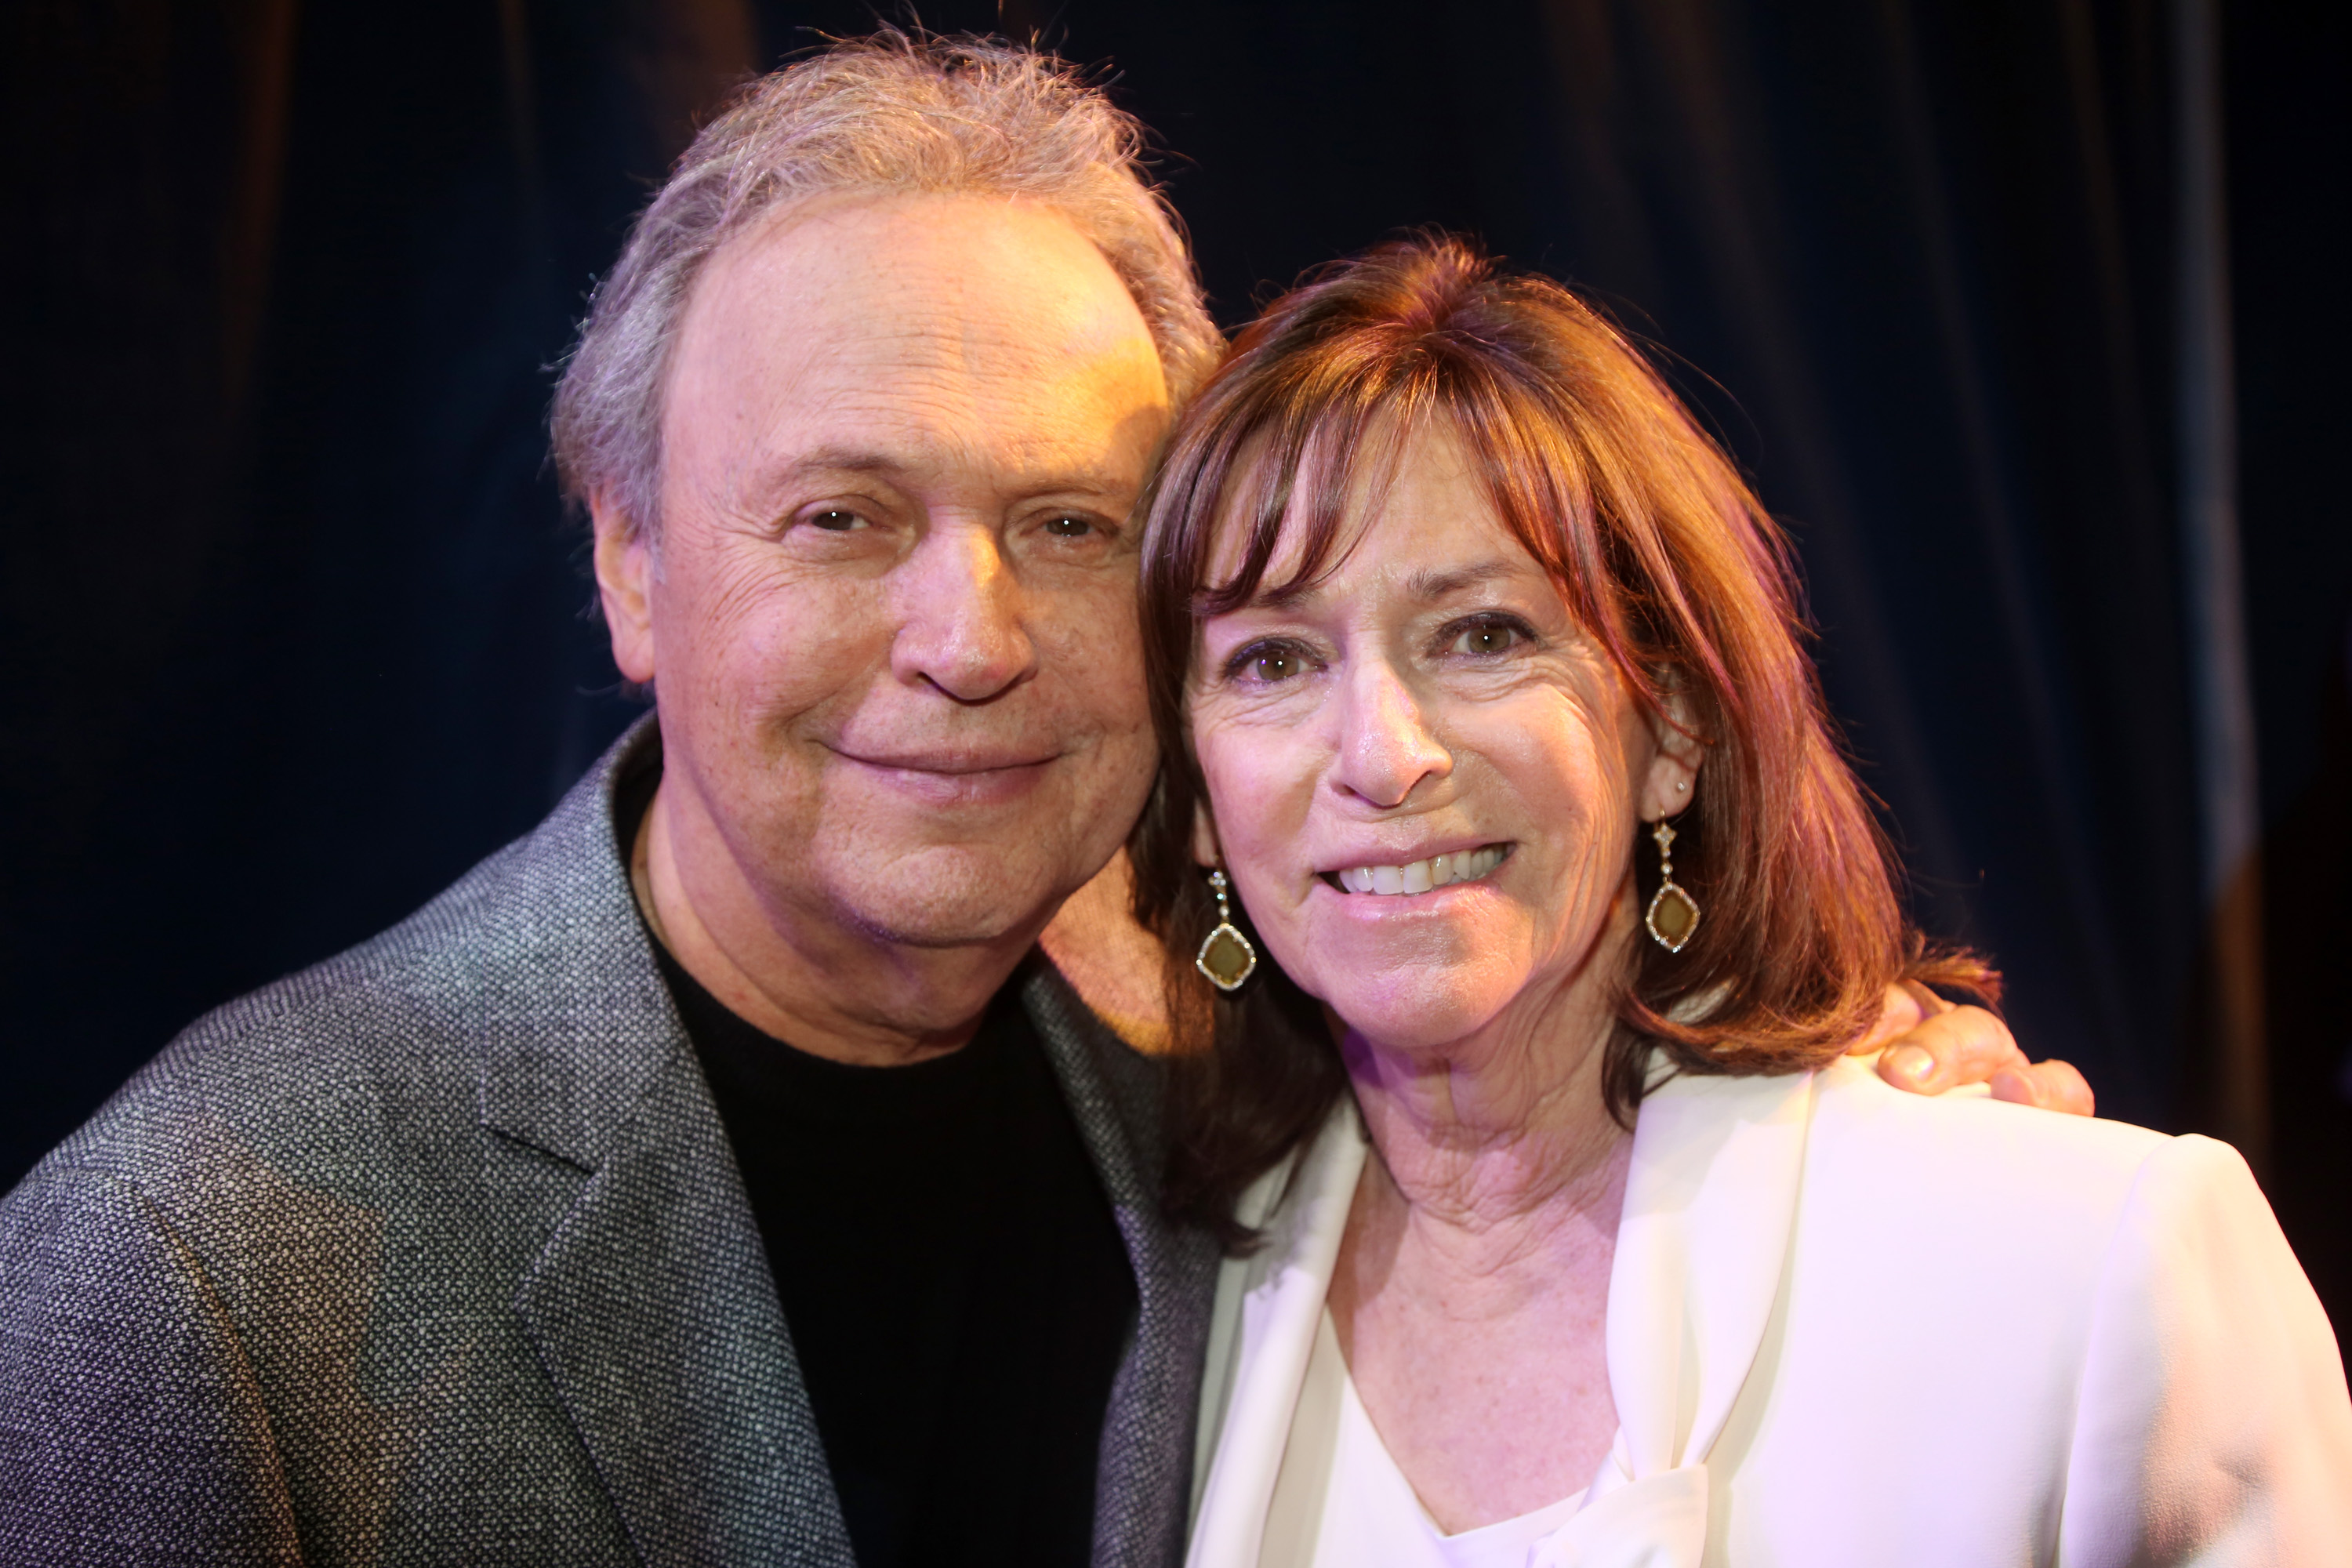 Billy Crystal and wife Janice Crystal pose backstage at the opening night of the new musical based on the 1992 film "Mr. Saturday Night" on Broadway at The Nederlander Theatre on April 27, 2022 in New York City. | Source: Getty Images